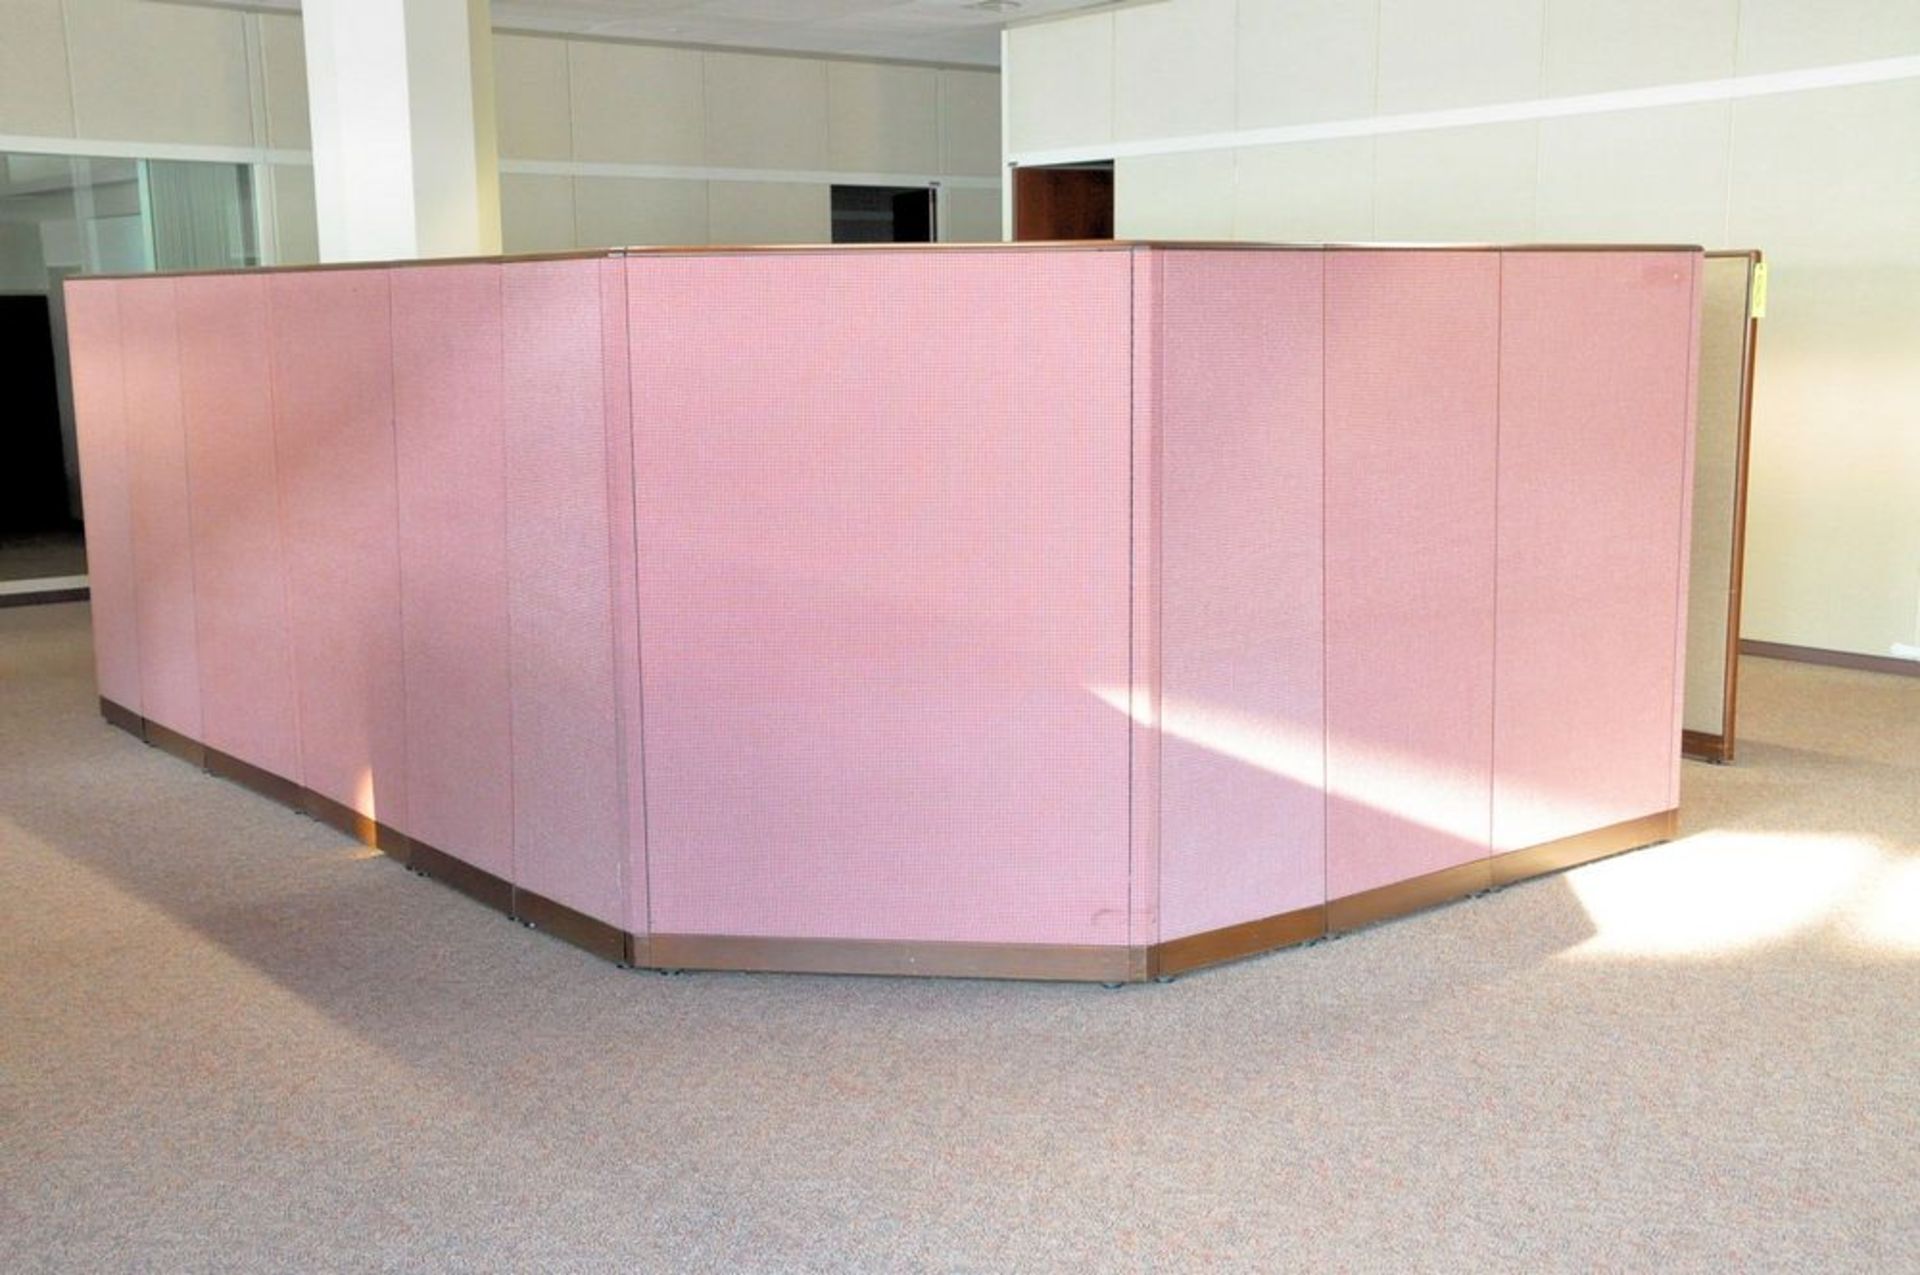 Lot-(6) Station Cubical Partition Work System with Furniture, (Atrium Edge), (4th Floor) - Image 4 of 16